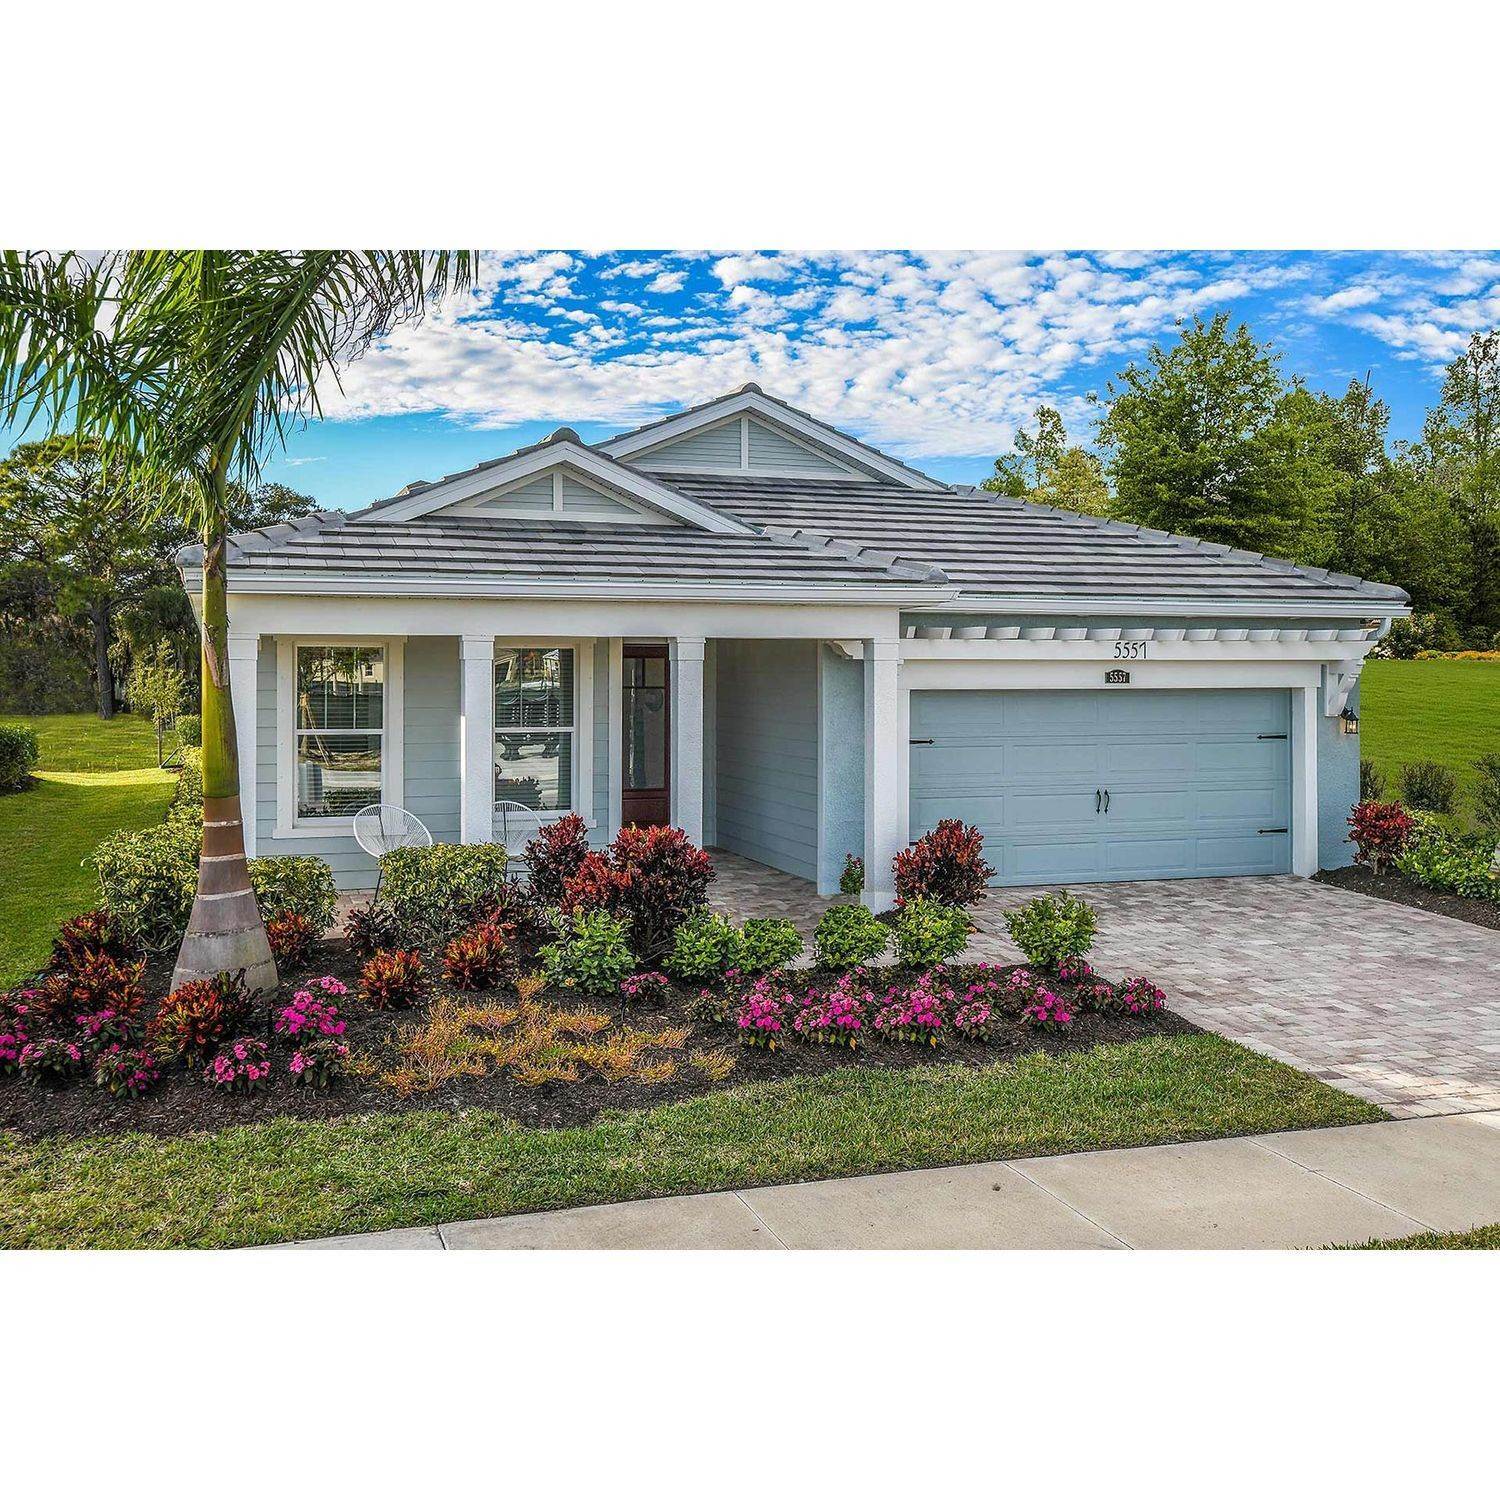 Single Family for Sale at Jubilee 5505 Blue Water Blvd. SARASOTA, FLORIDA 34238 UNITED STATES